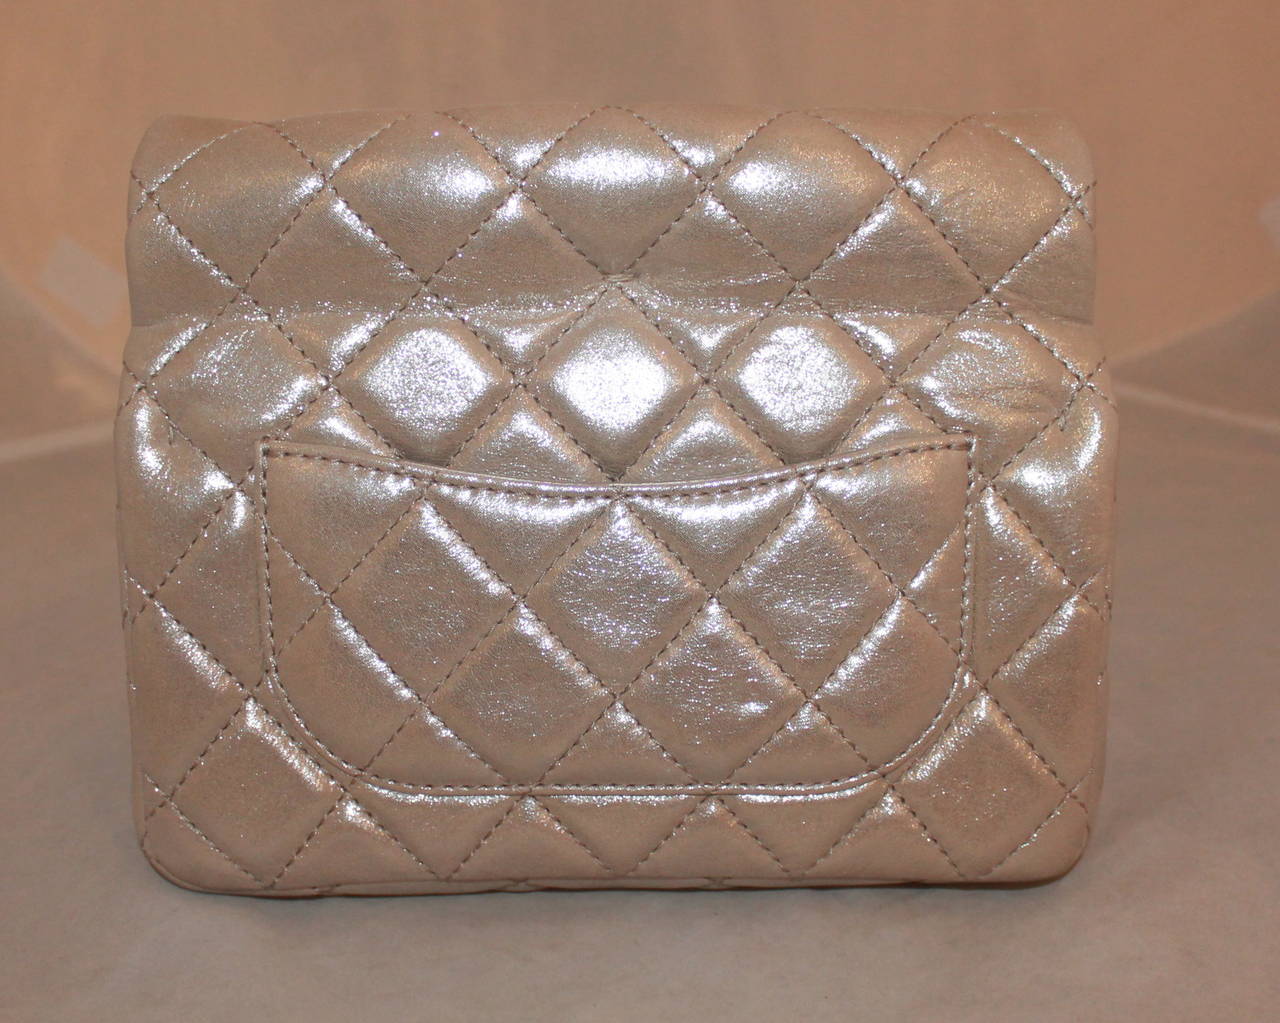 Chanel Iridescent Nude Reissue Style Roll Clutch - circa 2013. This clutch is in impeccable condition with no markings. It comes with a duster and card. 

Measurements:
Length- 6.5